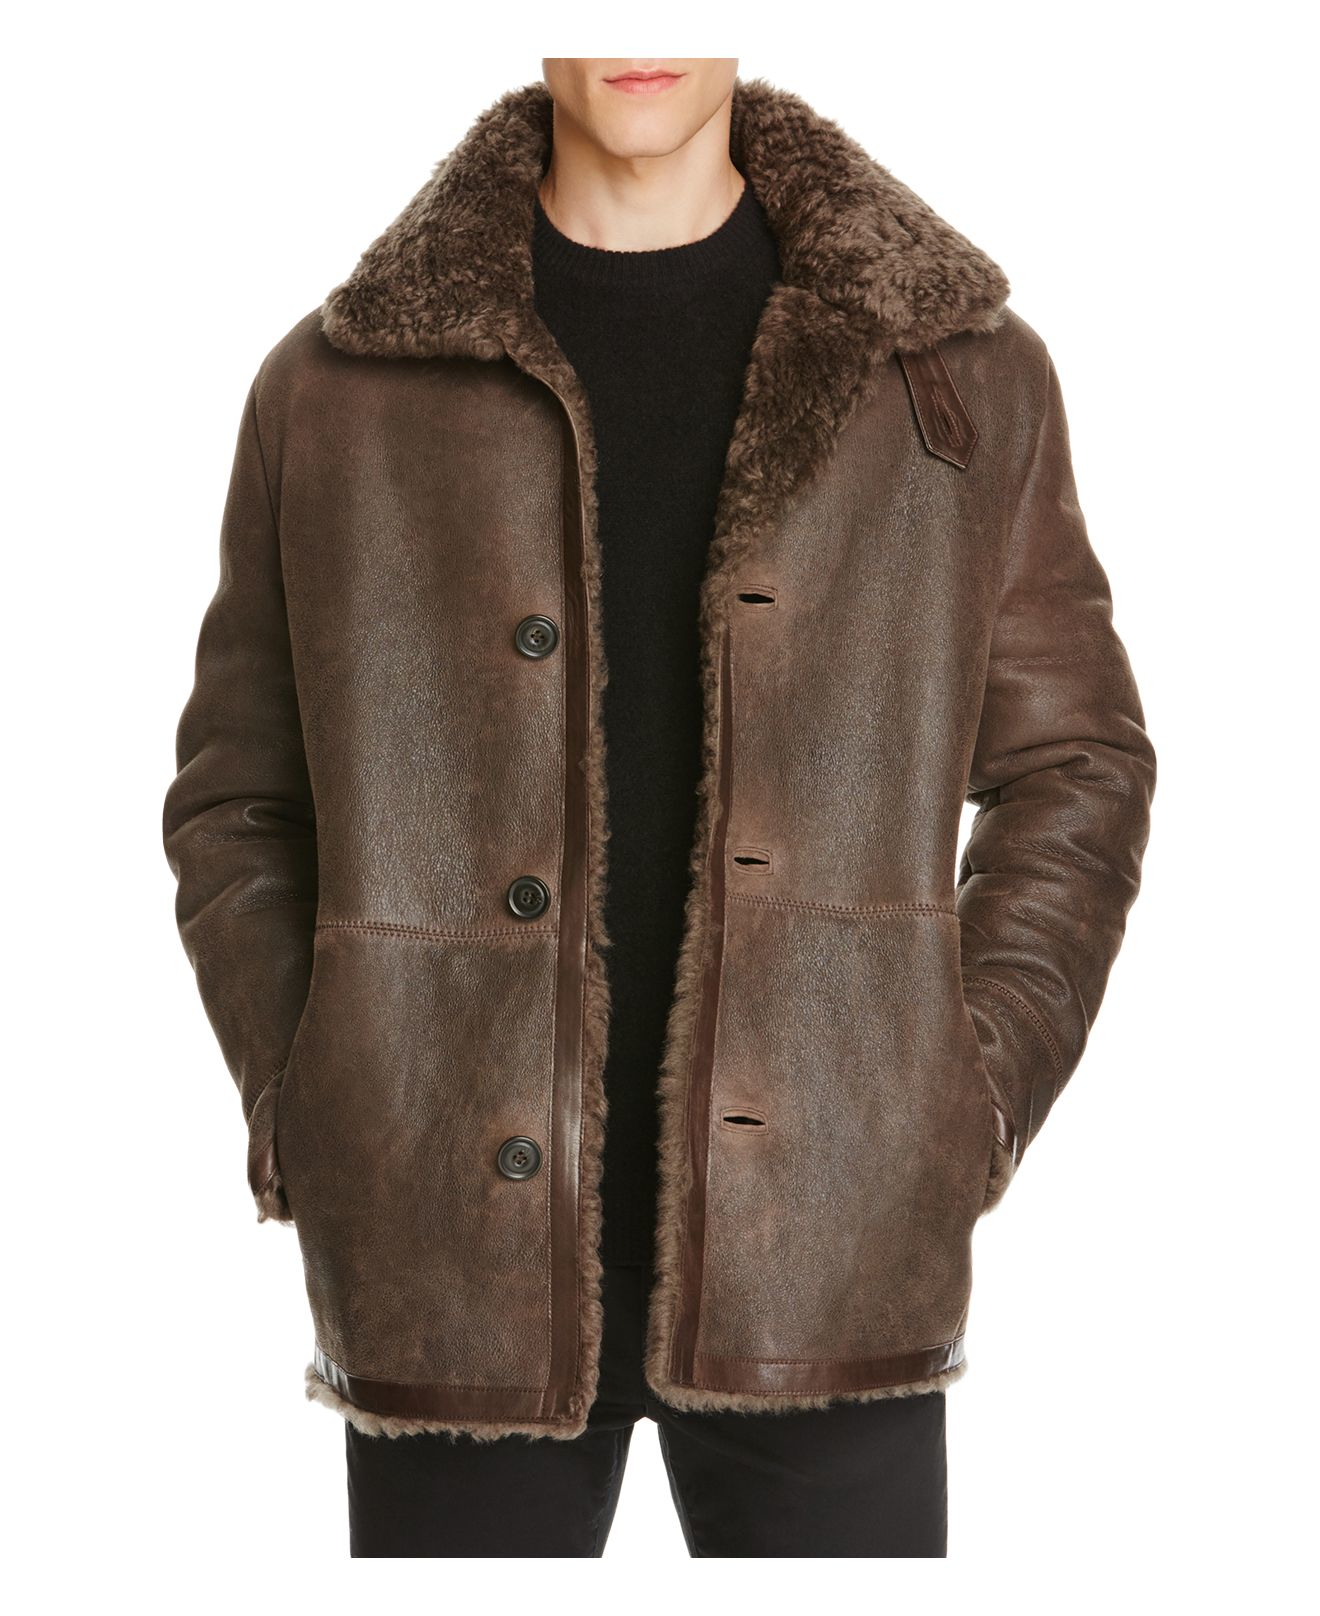 Vince Leather Shearling Coat in Brown for Men - Lyst